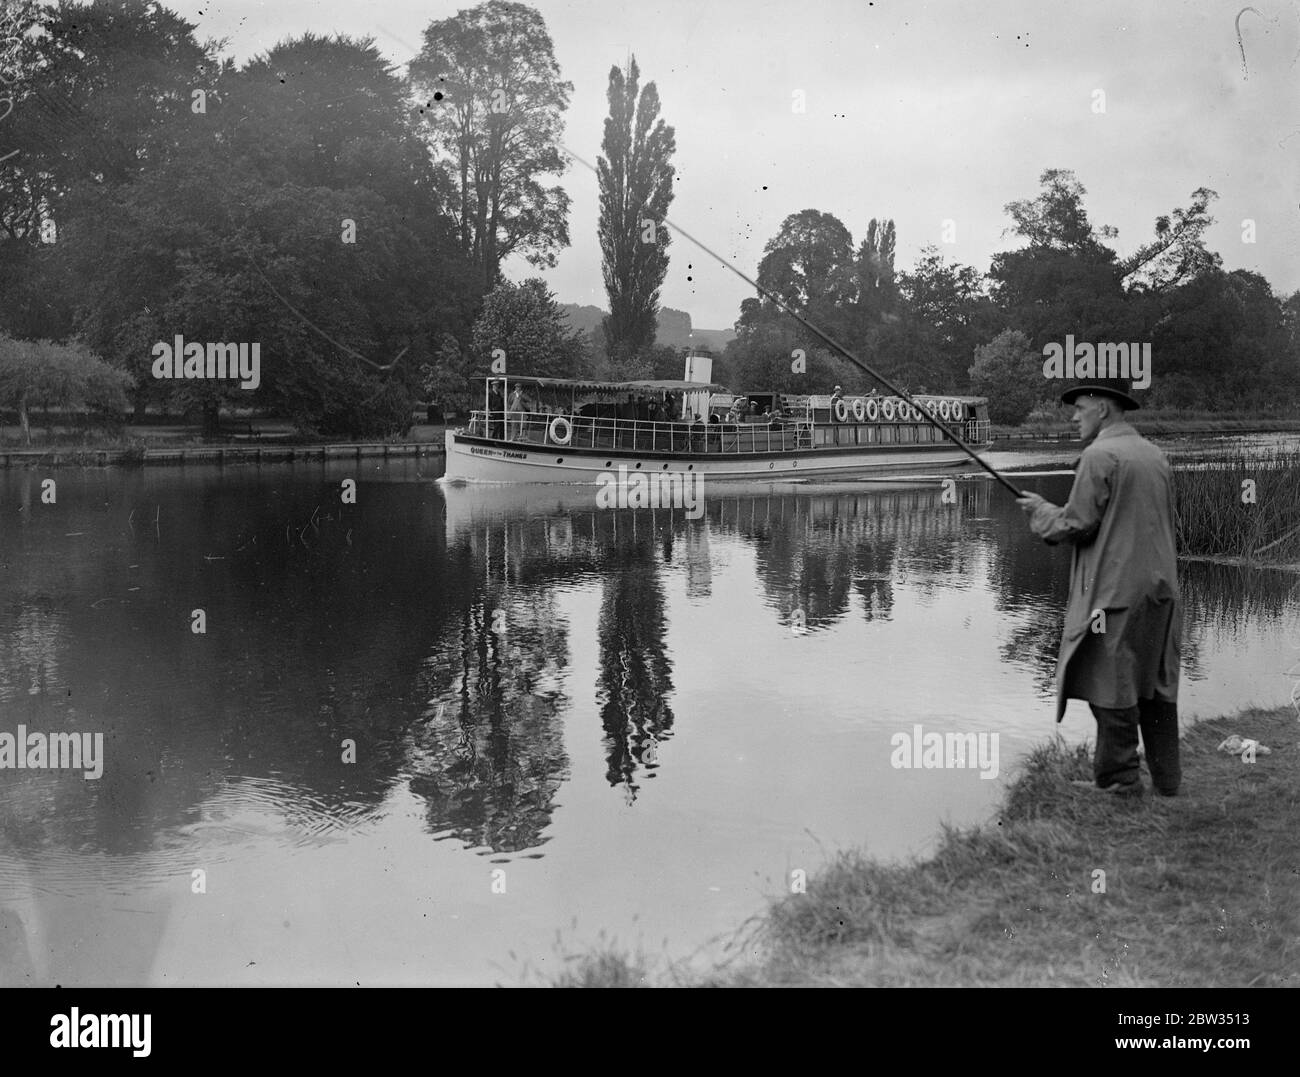 An angler ' s paradise at Pangbourne . Hundreds of fisherman of all ages took part in a great festival , on the river Thames at Pangbourne , Berkshire . Reflections in the river as a steamer passes by and an angler waits for a catch . 24 July 1932 Stock Photo